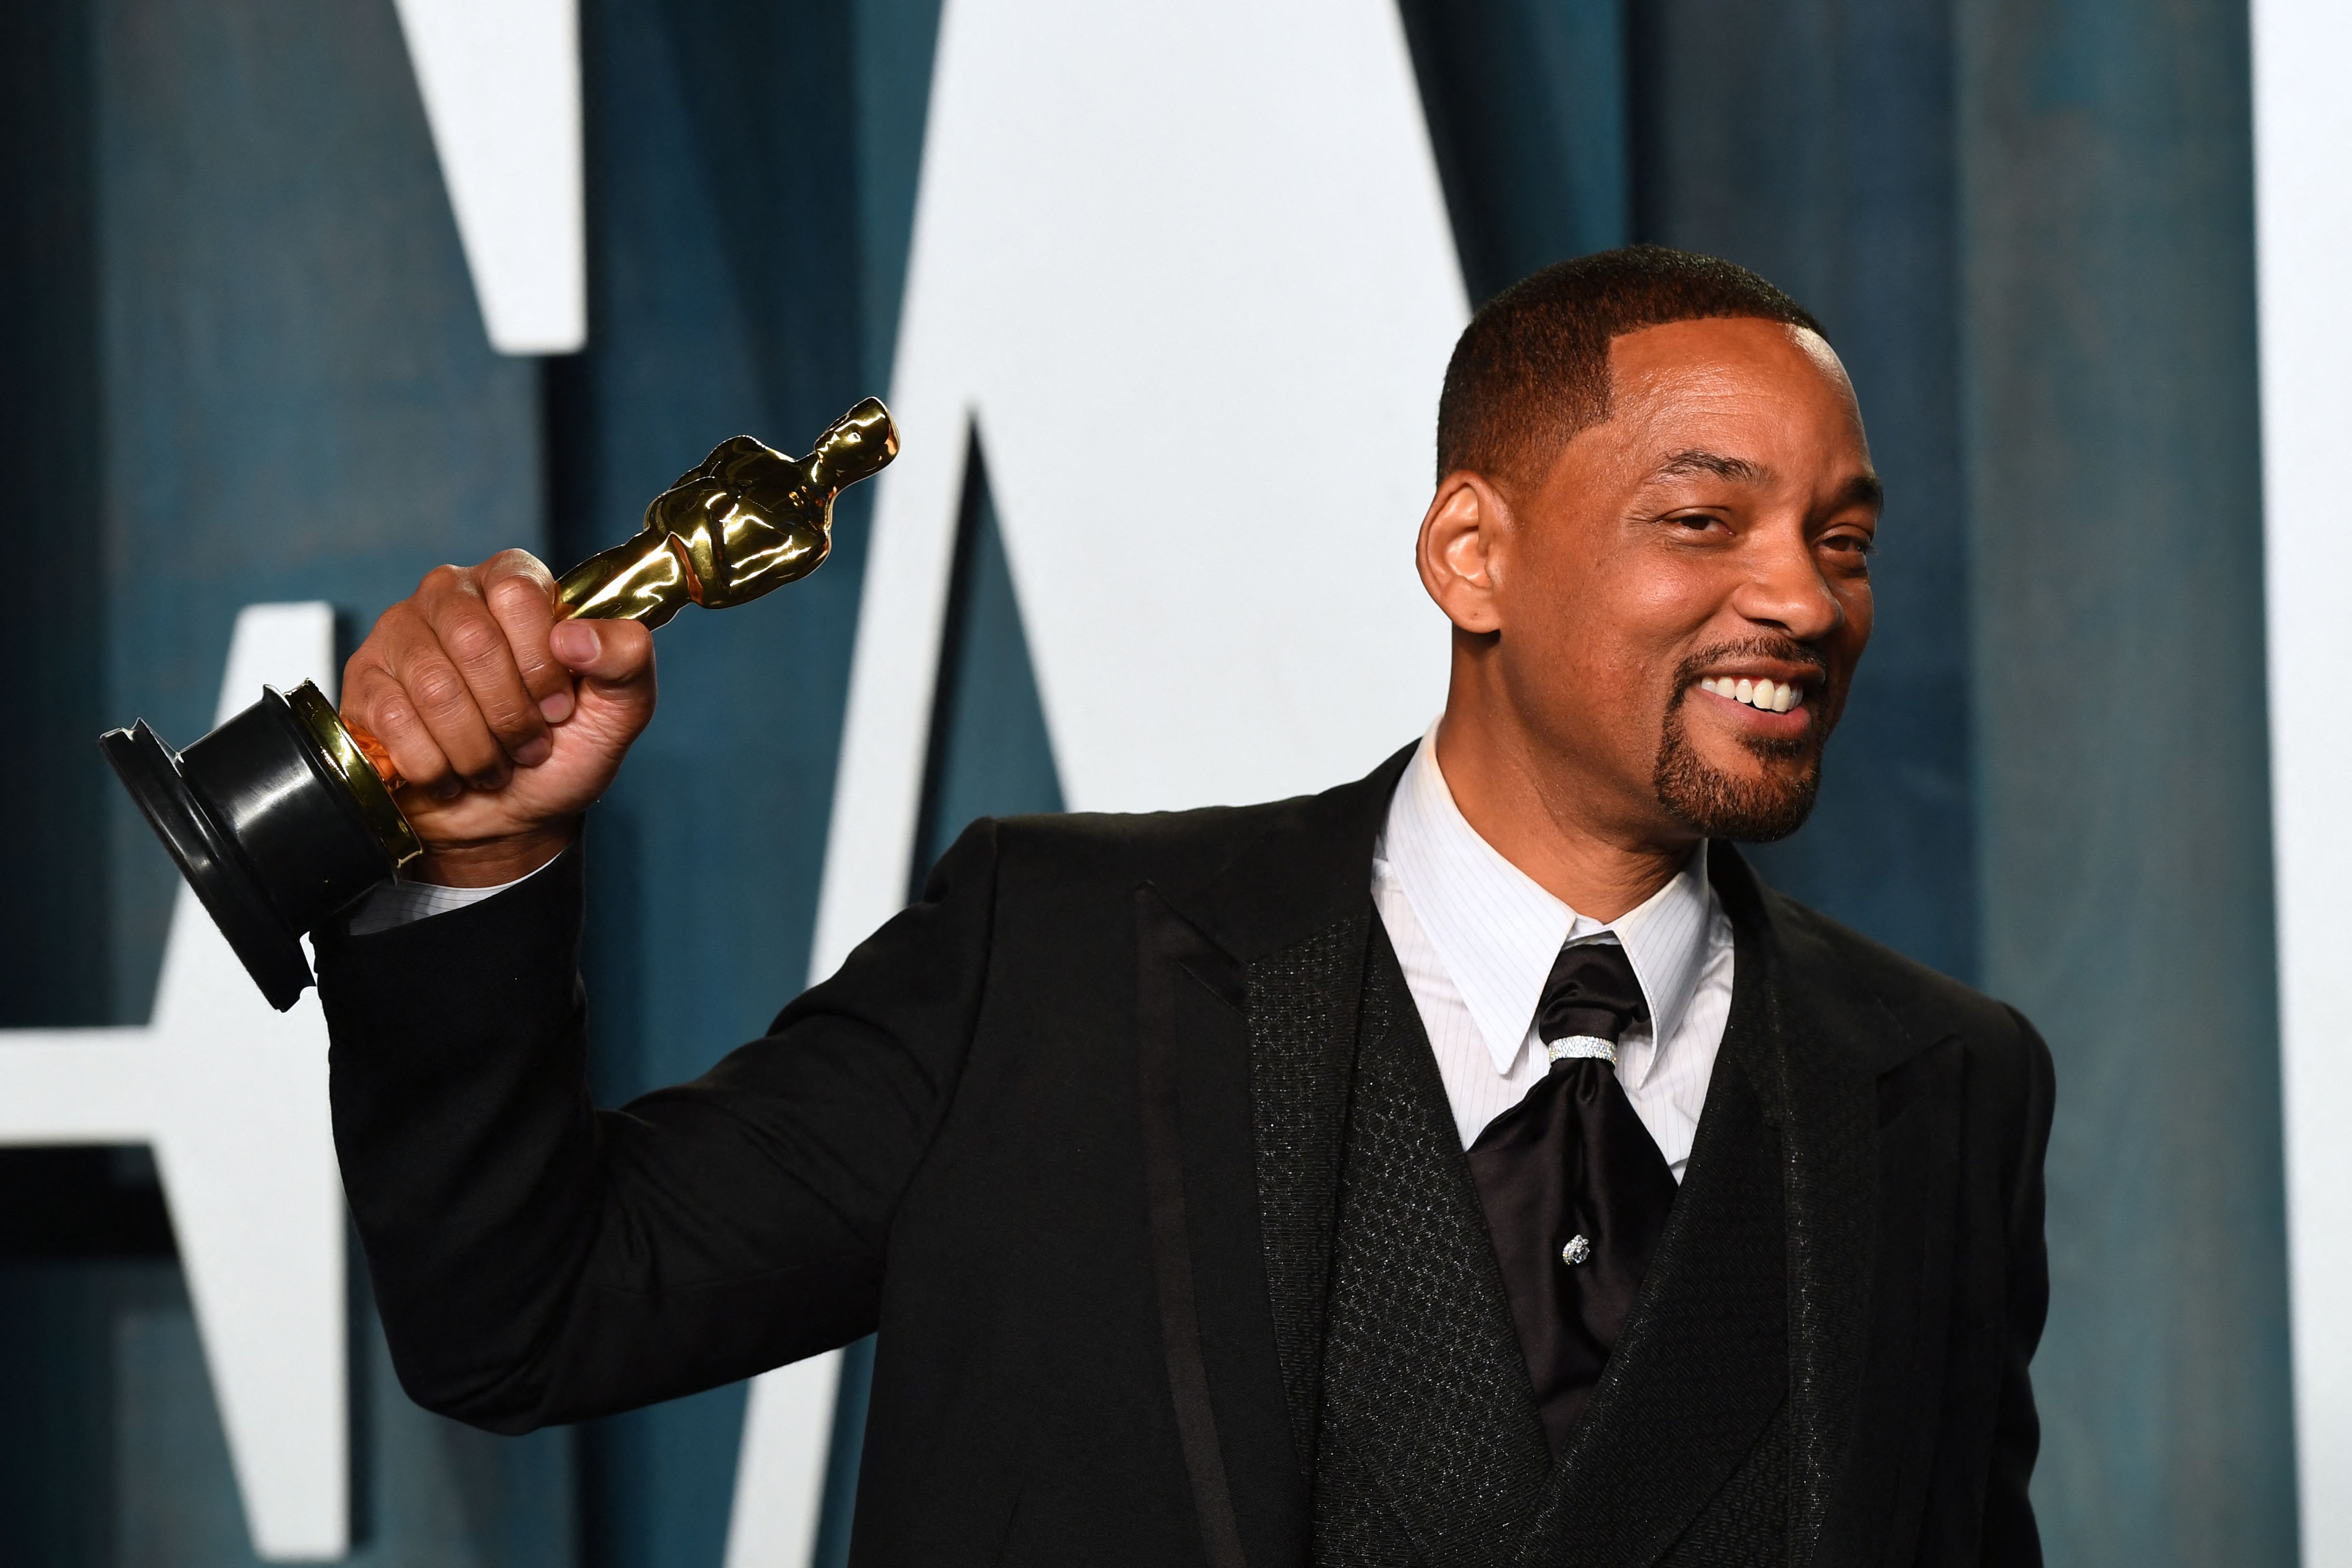 (FILES) In this file photo taken on March 28, 2022 US actor Will Smith holds his award for Best Actor in a Leading Role for "King Richard" as he attends the 2022 Vanity Fair Oscar Party following the 94th Oscars at the The Wallis Annenberg Center for the Performing Arts in Beverly Hills, California. - Will Smith has tendered his resignation from the body that awards the Oscars after his attack on Chris Rock during the weekend ceremony, a statement said April 1, 2022. (Photo by Patrick T. FALLON / AFP)